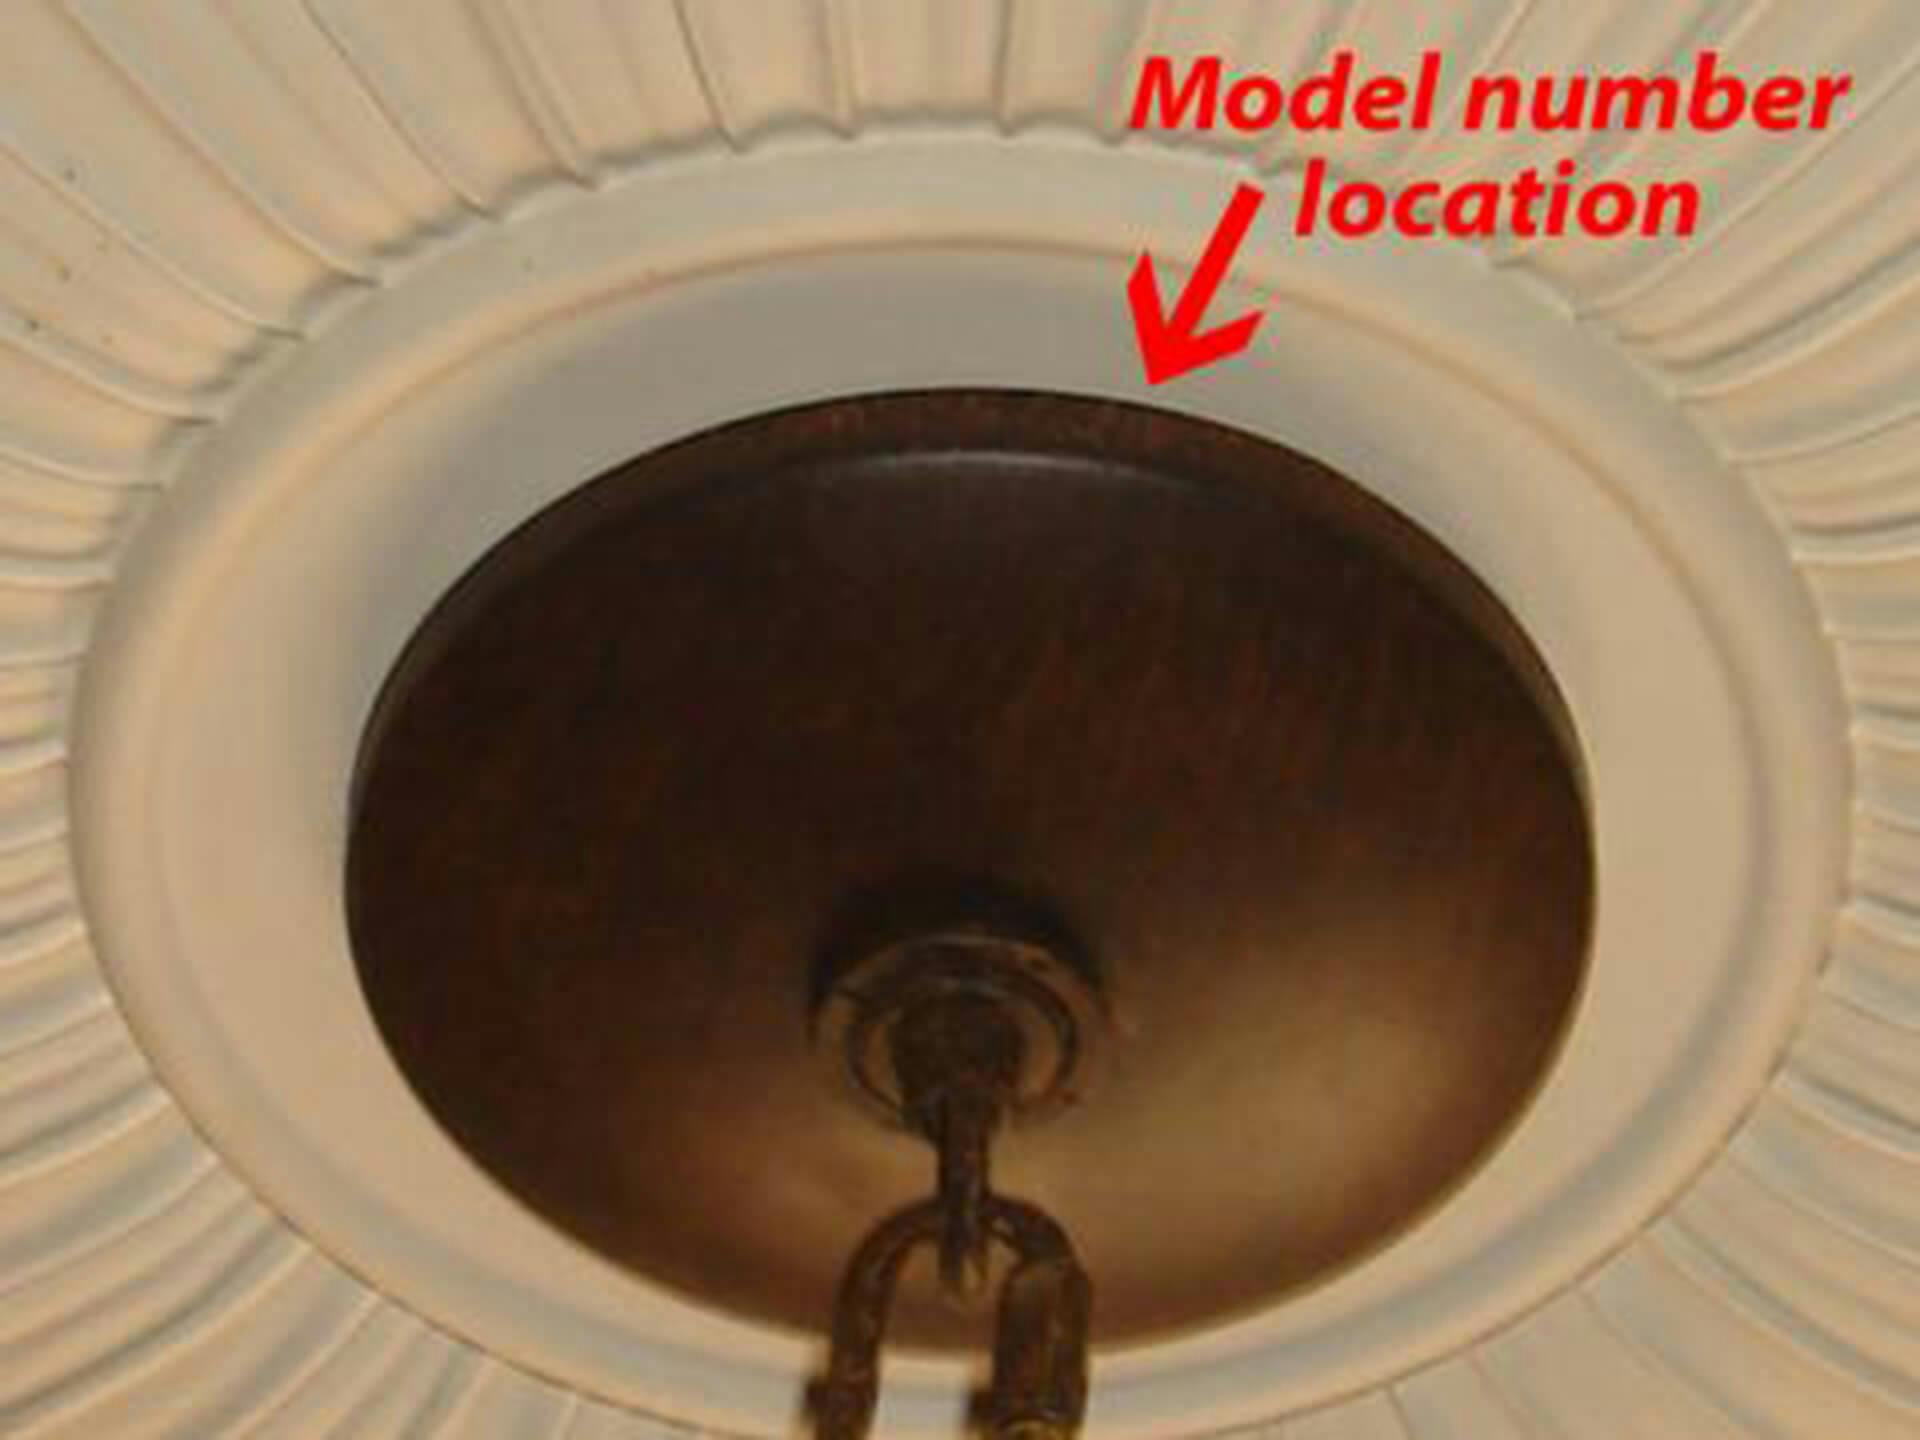 Close up of the aztec chandelier ceiling mount with the words "model number location" pointing underneath.